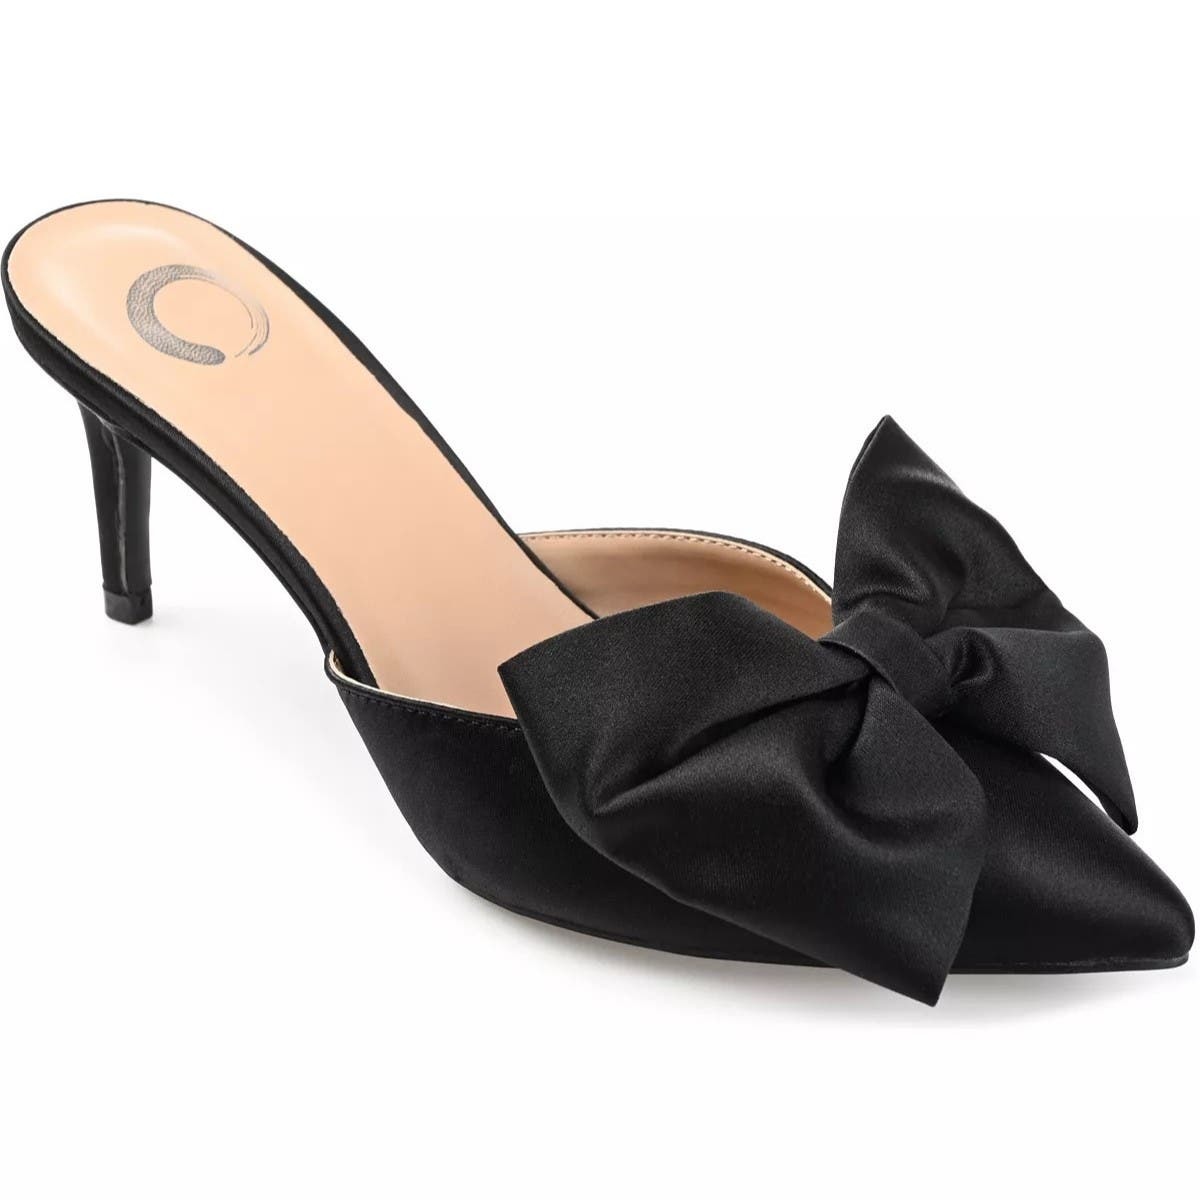 Primary image for Journee Collection Women Stiletto Bow Mule Heels Tiarra Size US 7.5M Black